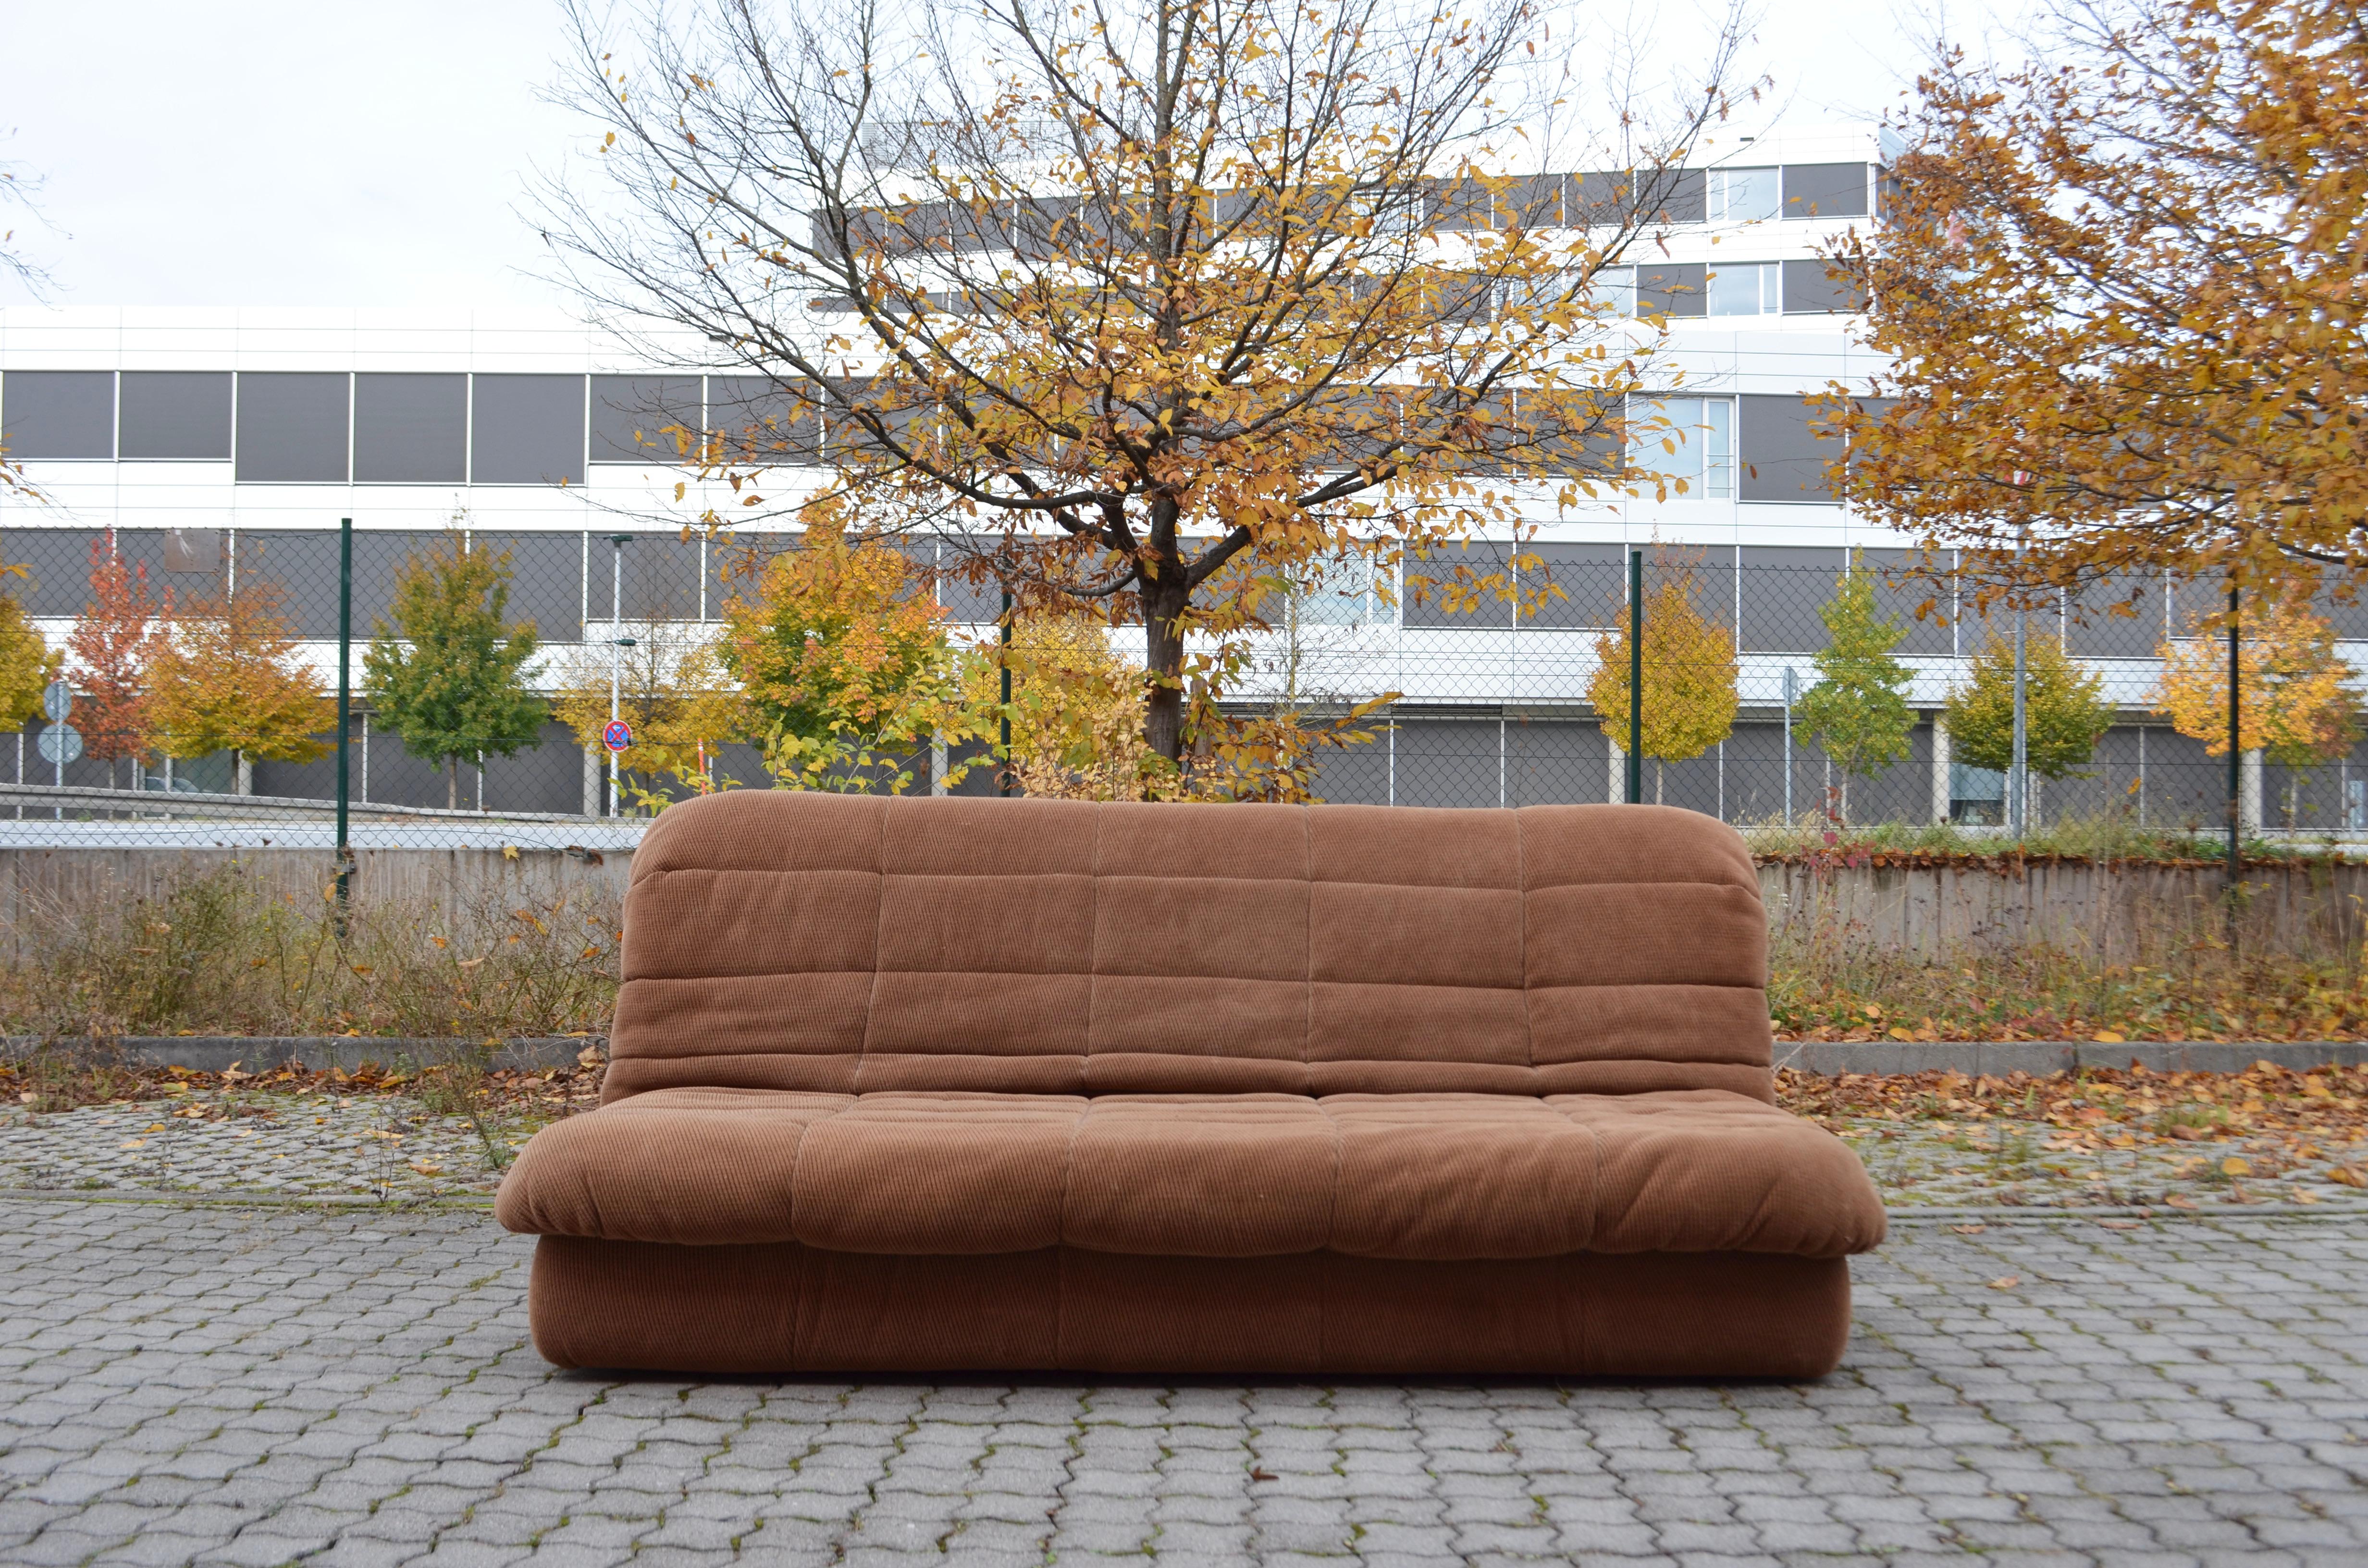 Cinna / Ligne Roset Sofa Daybed Model GAO designed by Jean Paul Laloy.
Rare Daybed Sofa in very good condition.
The colour of the fabric is brown and has a velours structure.
It is soft and comfortable.
The Sofa can be transformed easily with